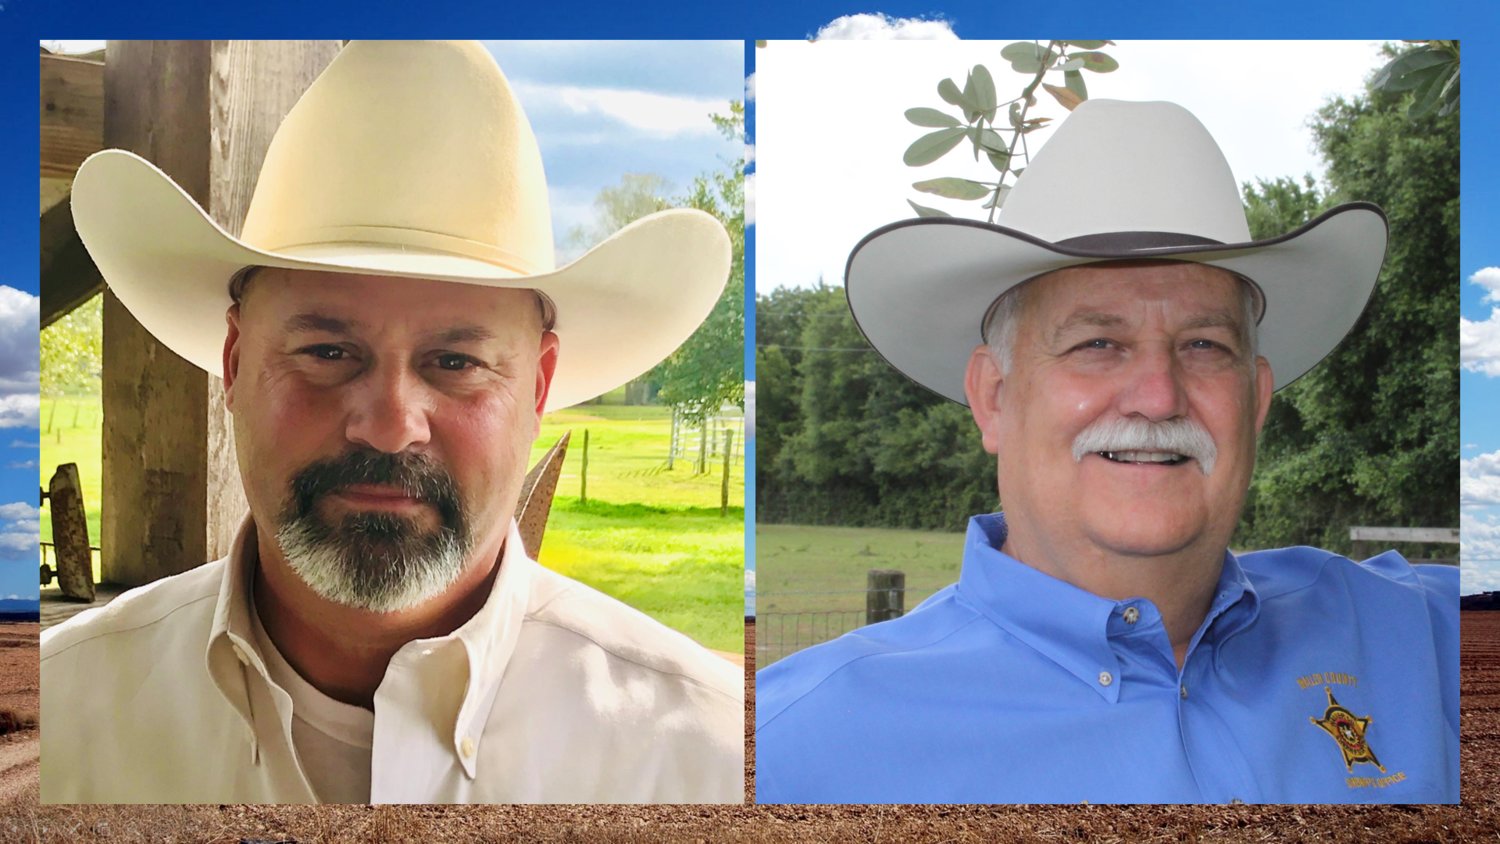 Troy Guidry (left) will face incumbent Waller County Sheriff R. Glenn Smith (right) in a runoff election July 14. Early voting begins June 29. The winner will face the Democratic nominee in the fall.